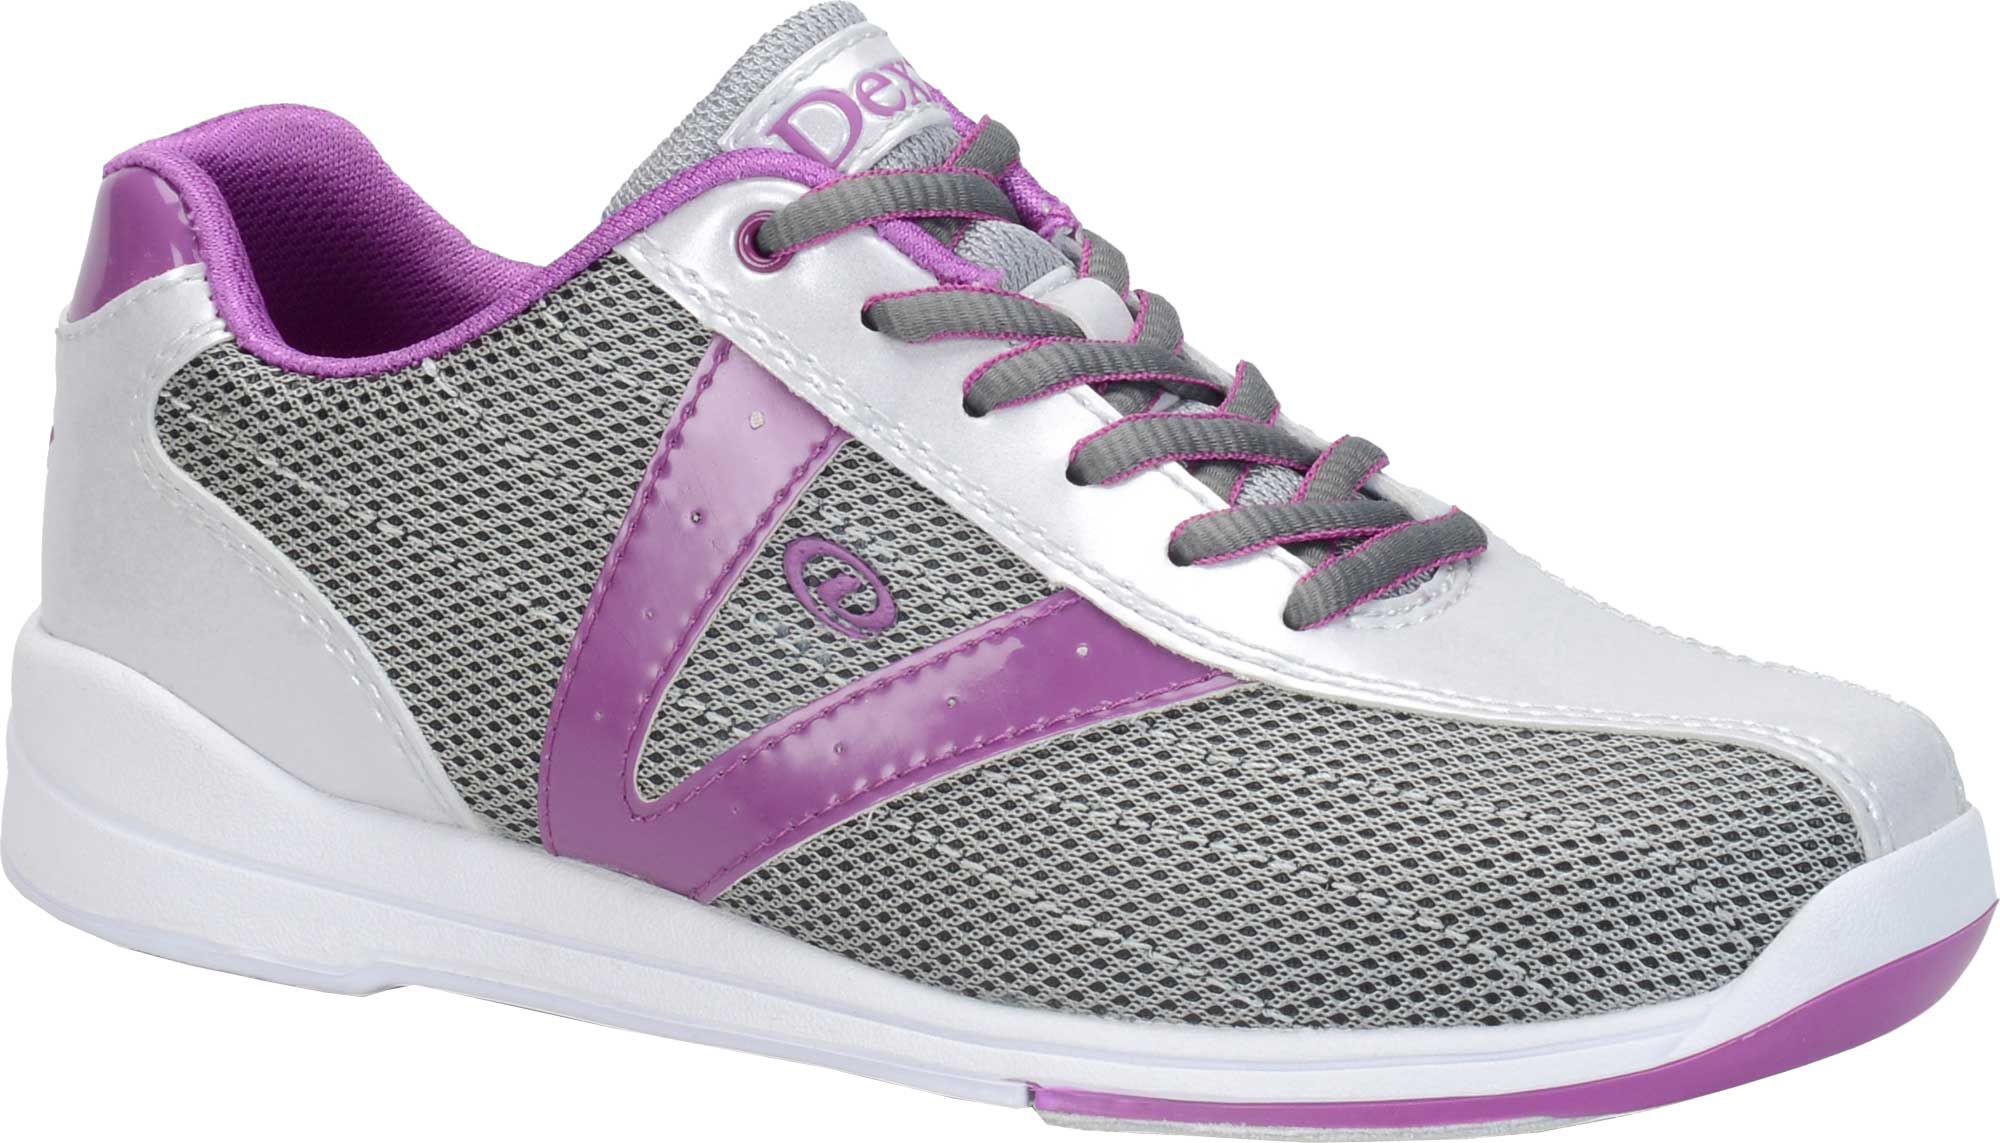 Dexter Women's Vicky Bowling Shoes 